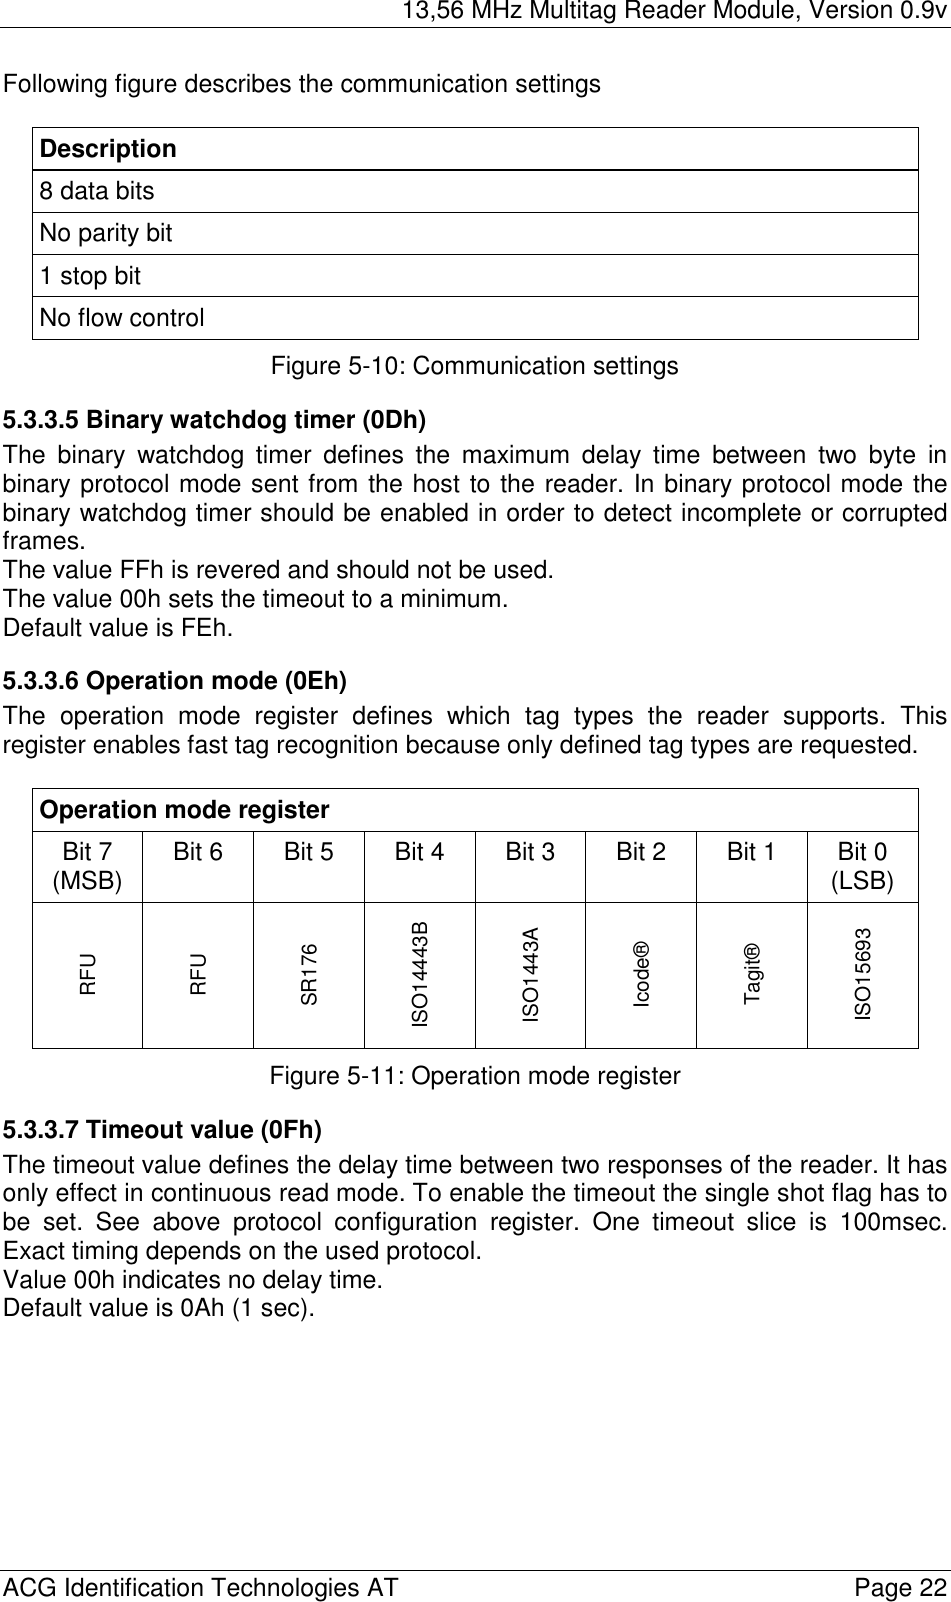 13,56 MHz Multitag Reader Module, Version 0.9v  ACG Identification Technologies AT    Page 22 Following figure describes the communication settings  Description 8 data bits No parity bit 1 stop bit No flow control Figure 5-10: Communication settings 5.3.3.5 Binary watchdog timer (0Dh) The binary watchdog timer defines the maximum delay time between two byte in binary protocol mode sent from the host to the reader. In binary protocol mode the binary watchdog timer should be enabled in order to detect incomplete or corrupted frames. The value FFh is revered and should not be used. The value 00h sets the timeout to a minimum. Default value is FEh. 5.3.3.6 Operation mode (0Eh) The operation mode register defines which tag types the reader supports. This register enables fast tag recognition because only defined tag types are requested.  Operation mode register Bit 7 (MSB)  Bit 6  Bit 5  Bit 4  Bit 3  Bit 2  Bit 1  Bit 0 (LSB) RFU RFU SR176 ISO14443B ISO1443A Icode® Tagit® ISO15693 Figure 5-11: Operation mode register 5.3.3.7 Timeout value (0Fh) The timeout value defines the delay time between two responses of the reader. It has only effect in continuous read mode. To enable the timeout the single shot flag has to be set. See above protocol configuration register. One timeout slice is 100msec. Exact timing depends on the used protocol. Value 00h indicates no delay time. Default value is 0Ah (1 sec). 